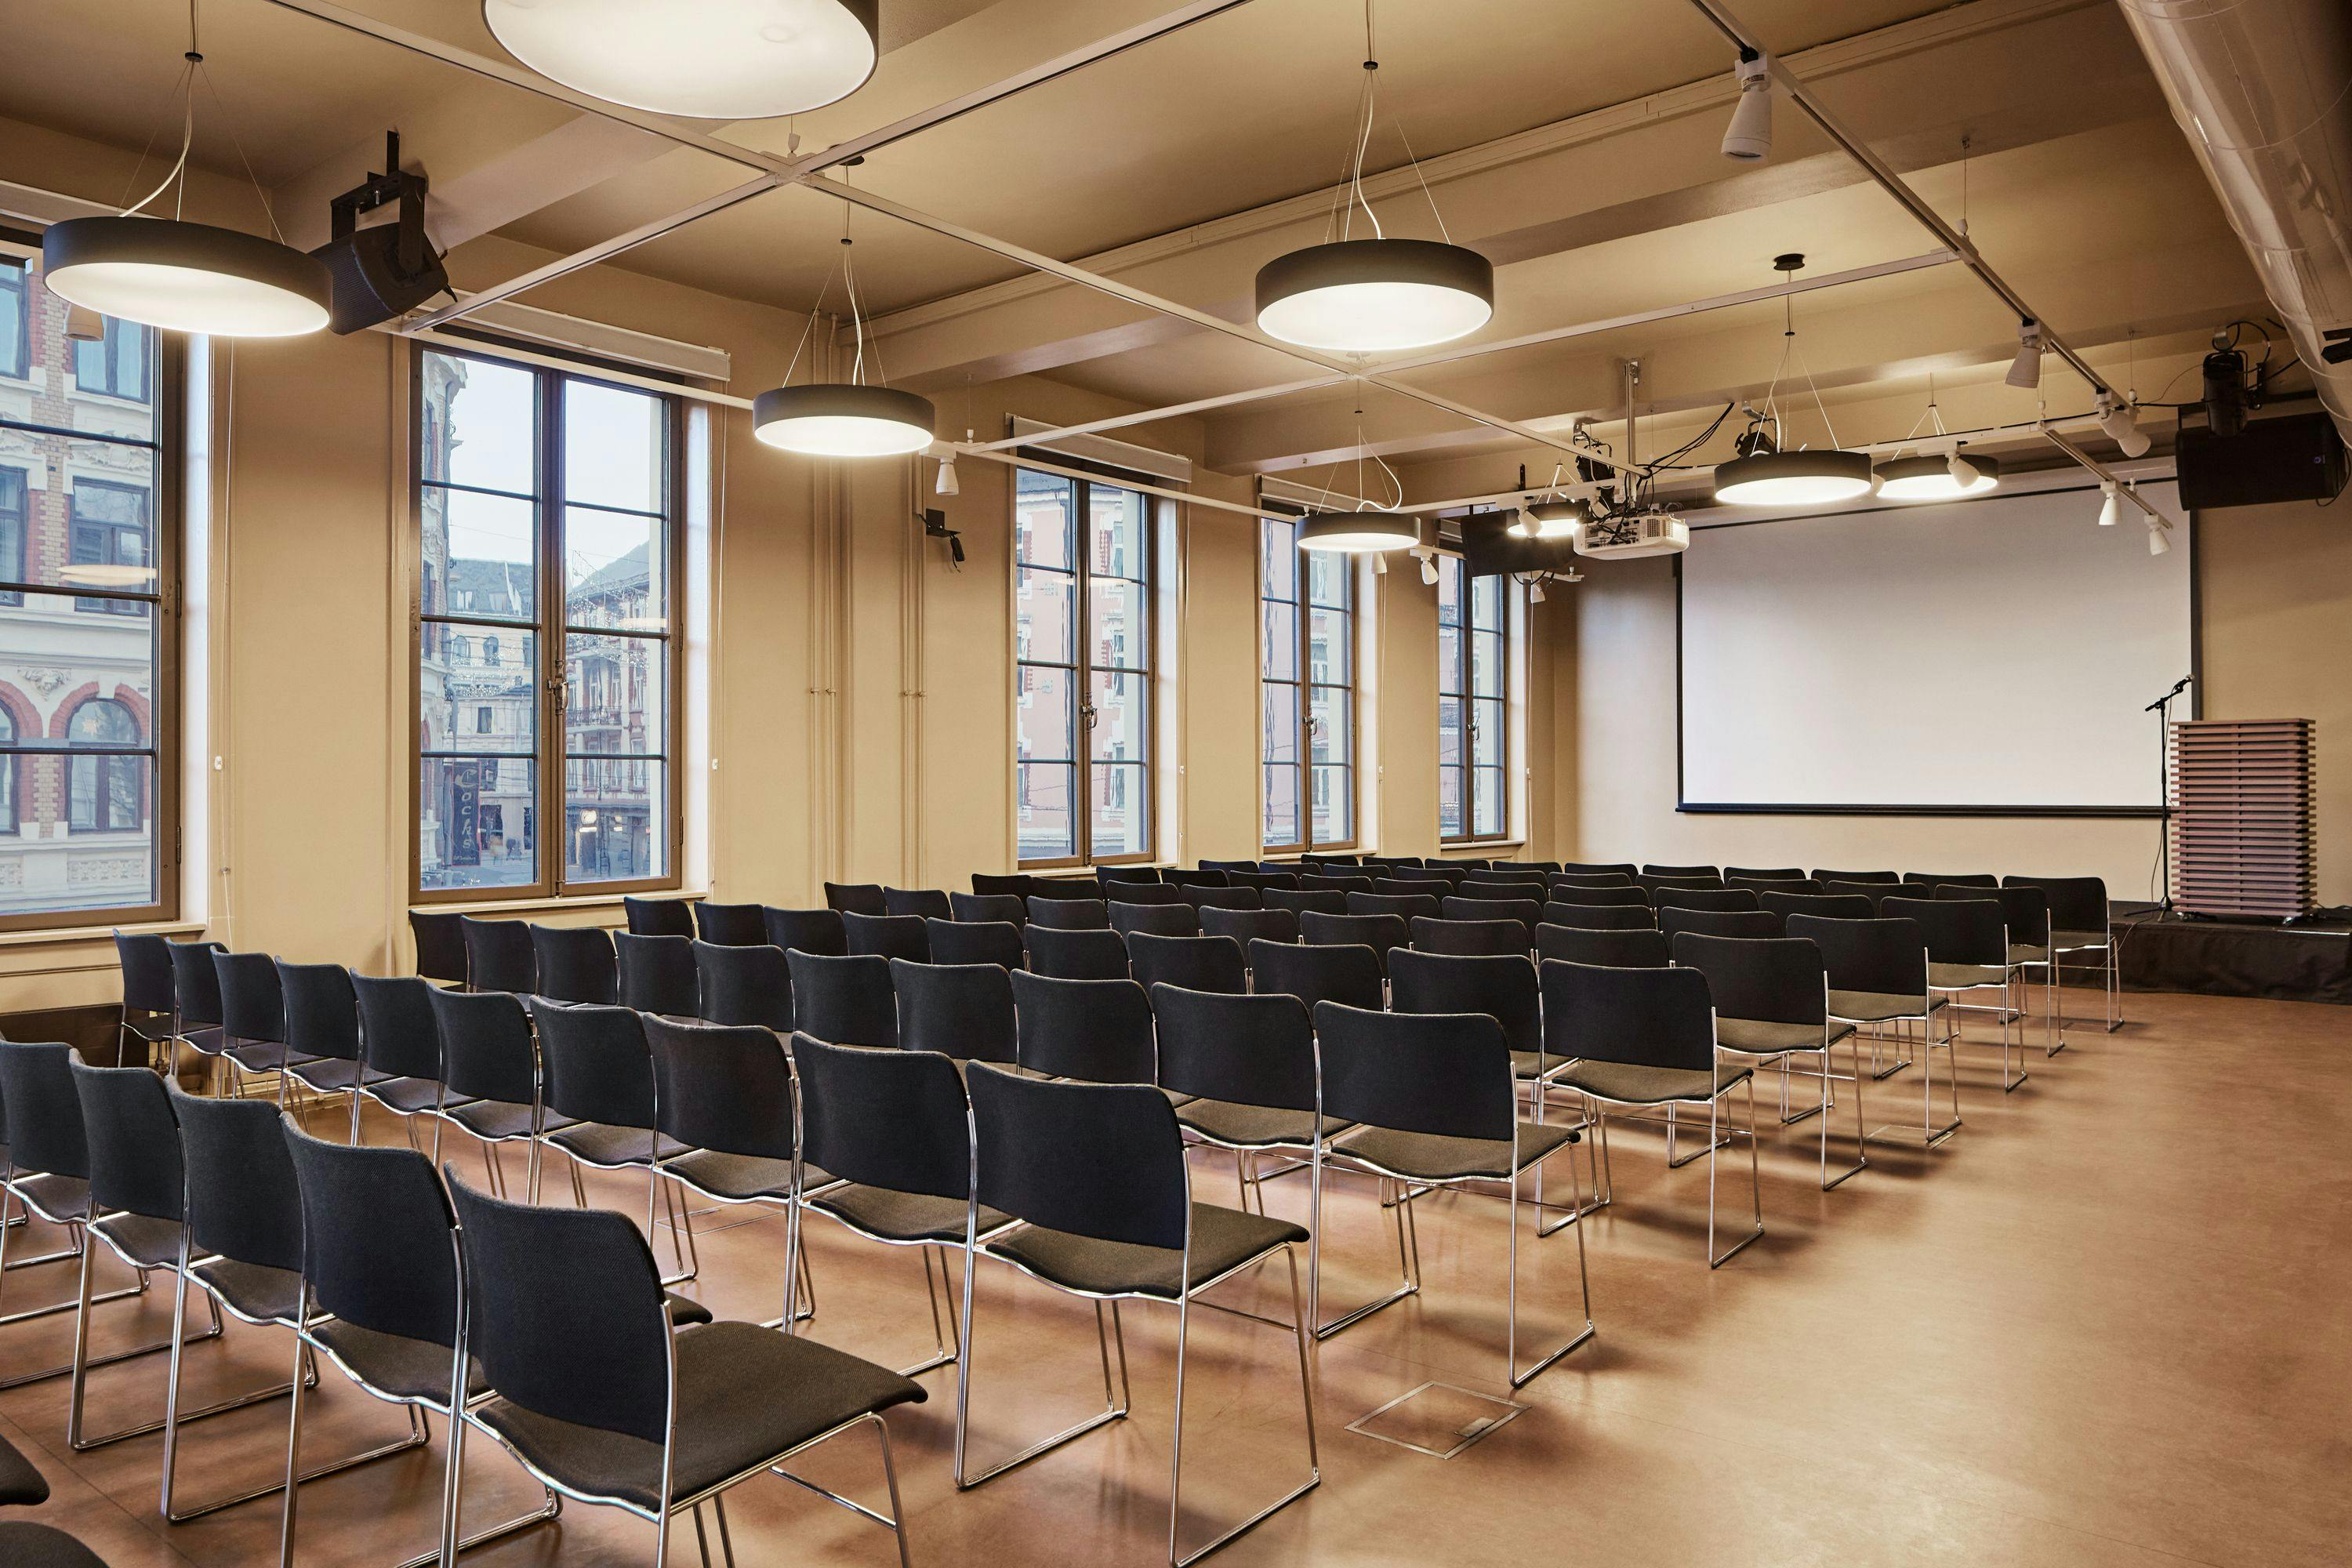 Picture of the room Skram at Litteraturhuset with empty rows of chairs